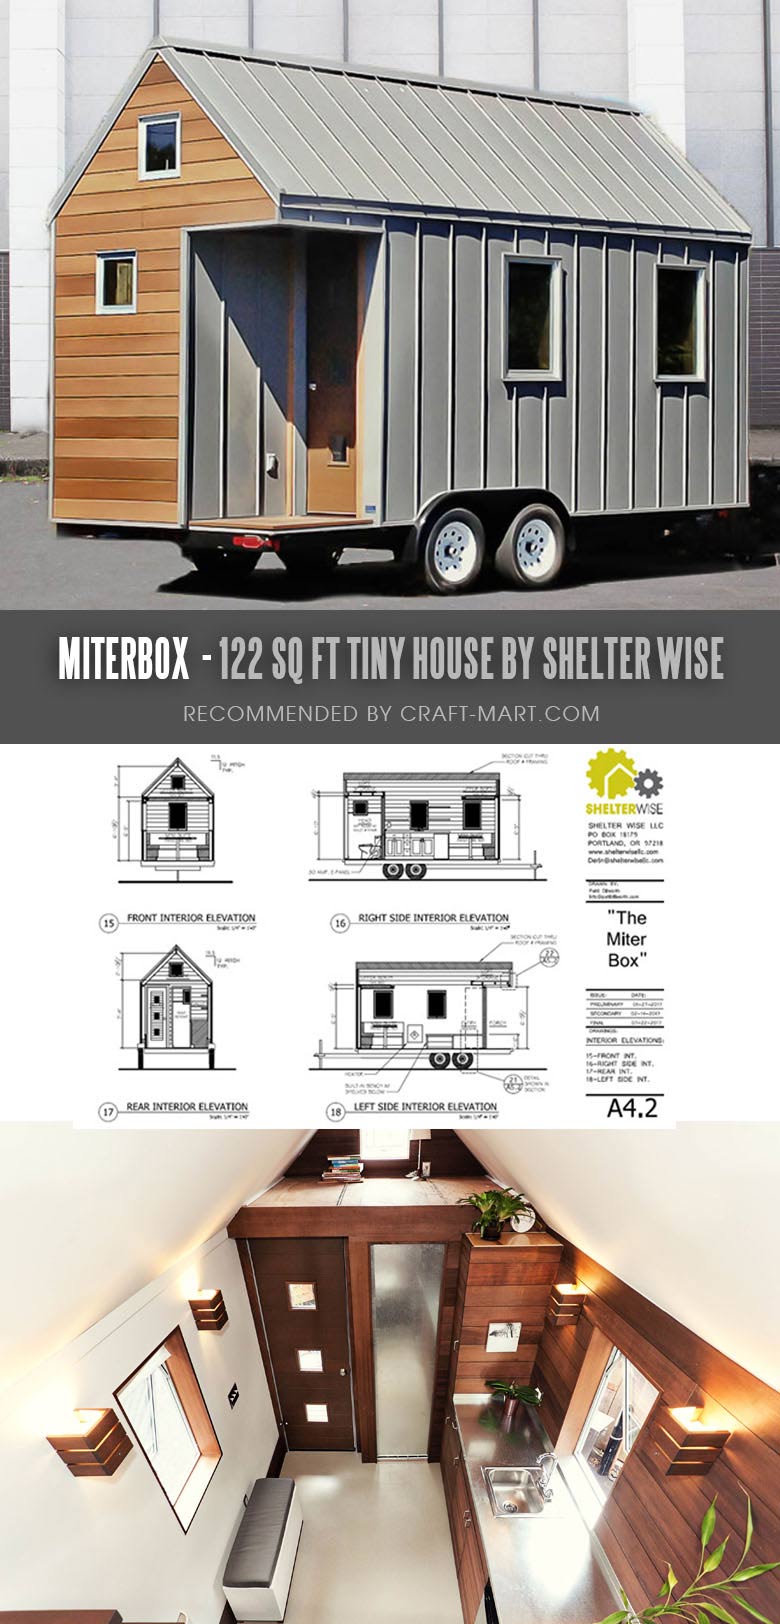 Tiny House Trailer Miterbox - A Modern Retreat or Minimalist Flat - one of the most affordable tiny houses on wheels. You can order it to be built or build it yourself using this mobile tiny house plans. #tinyhouse